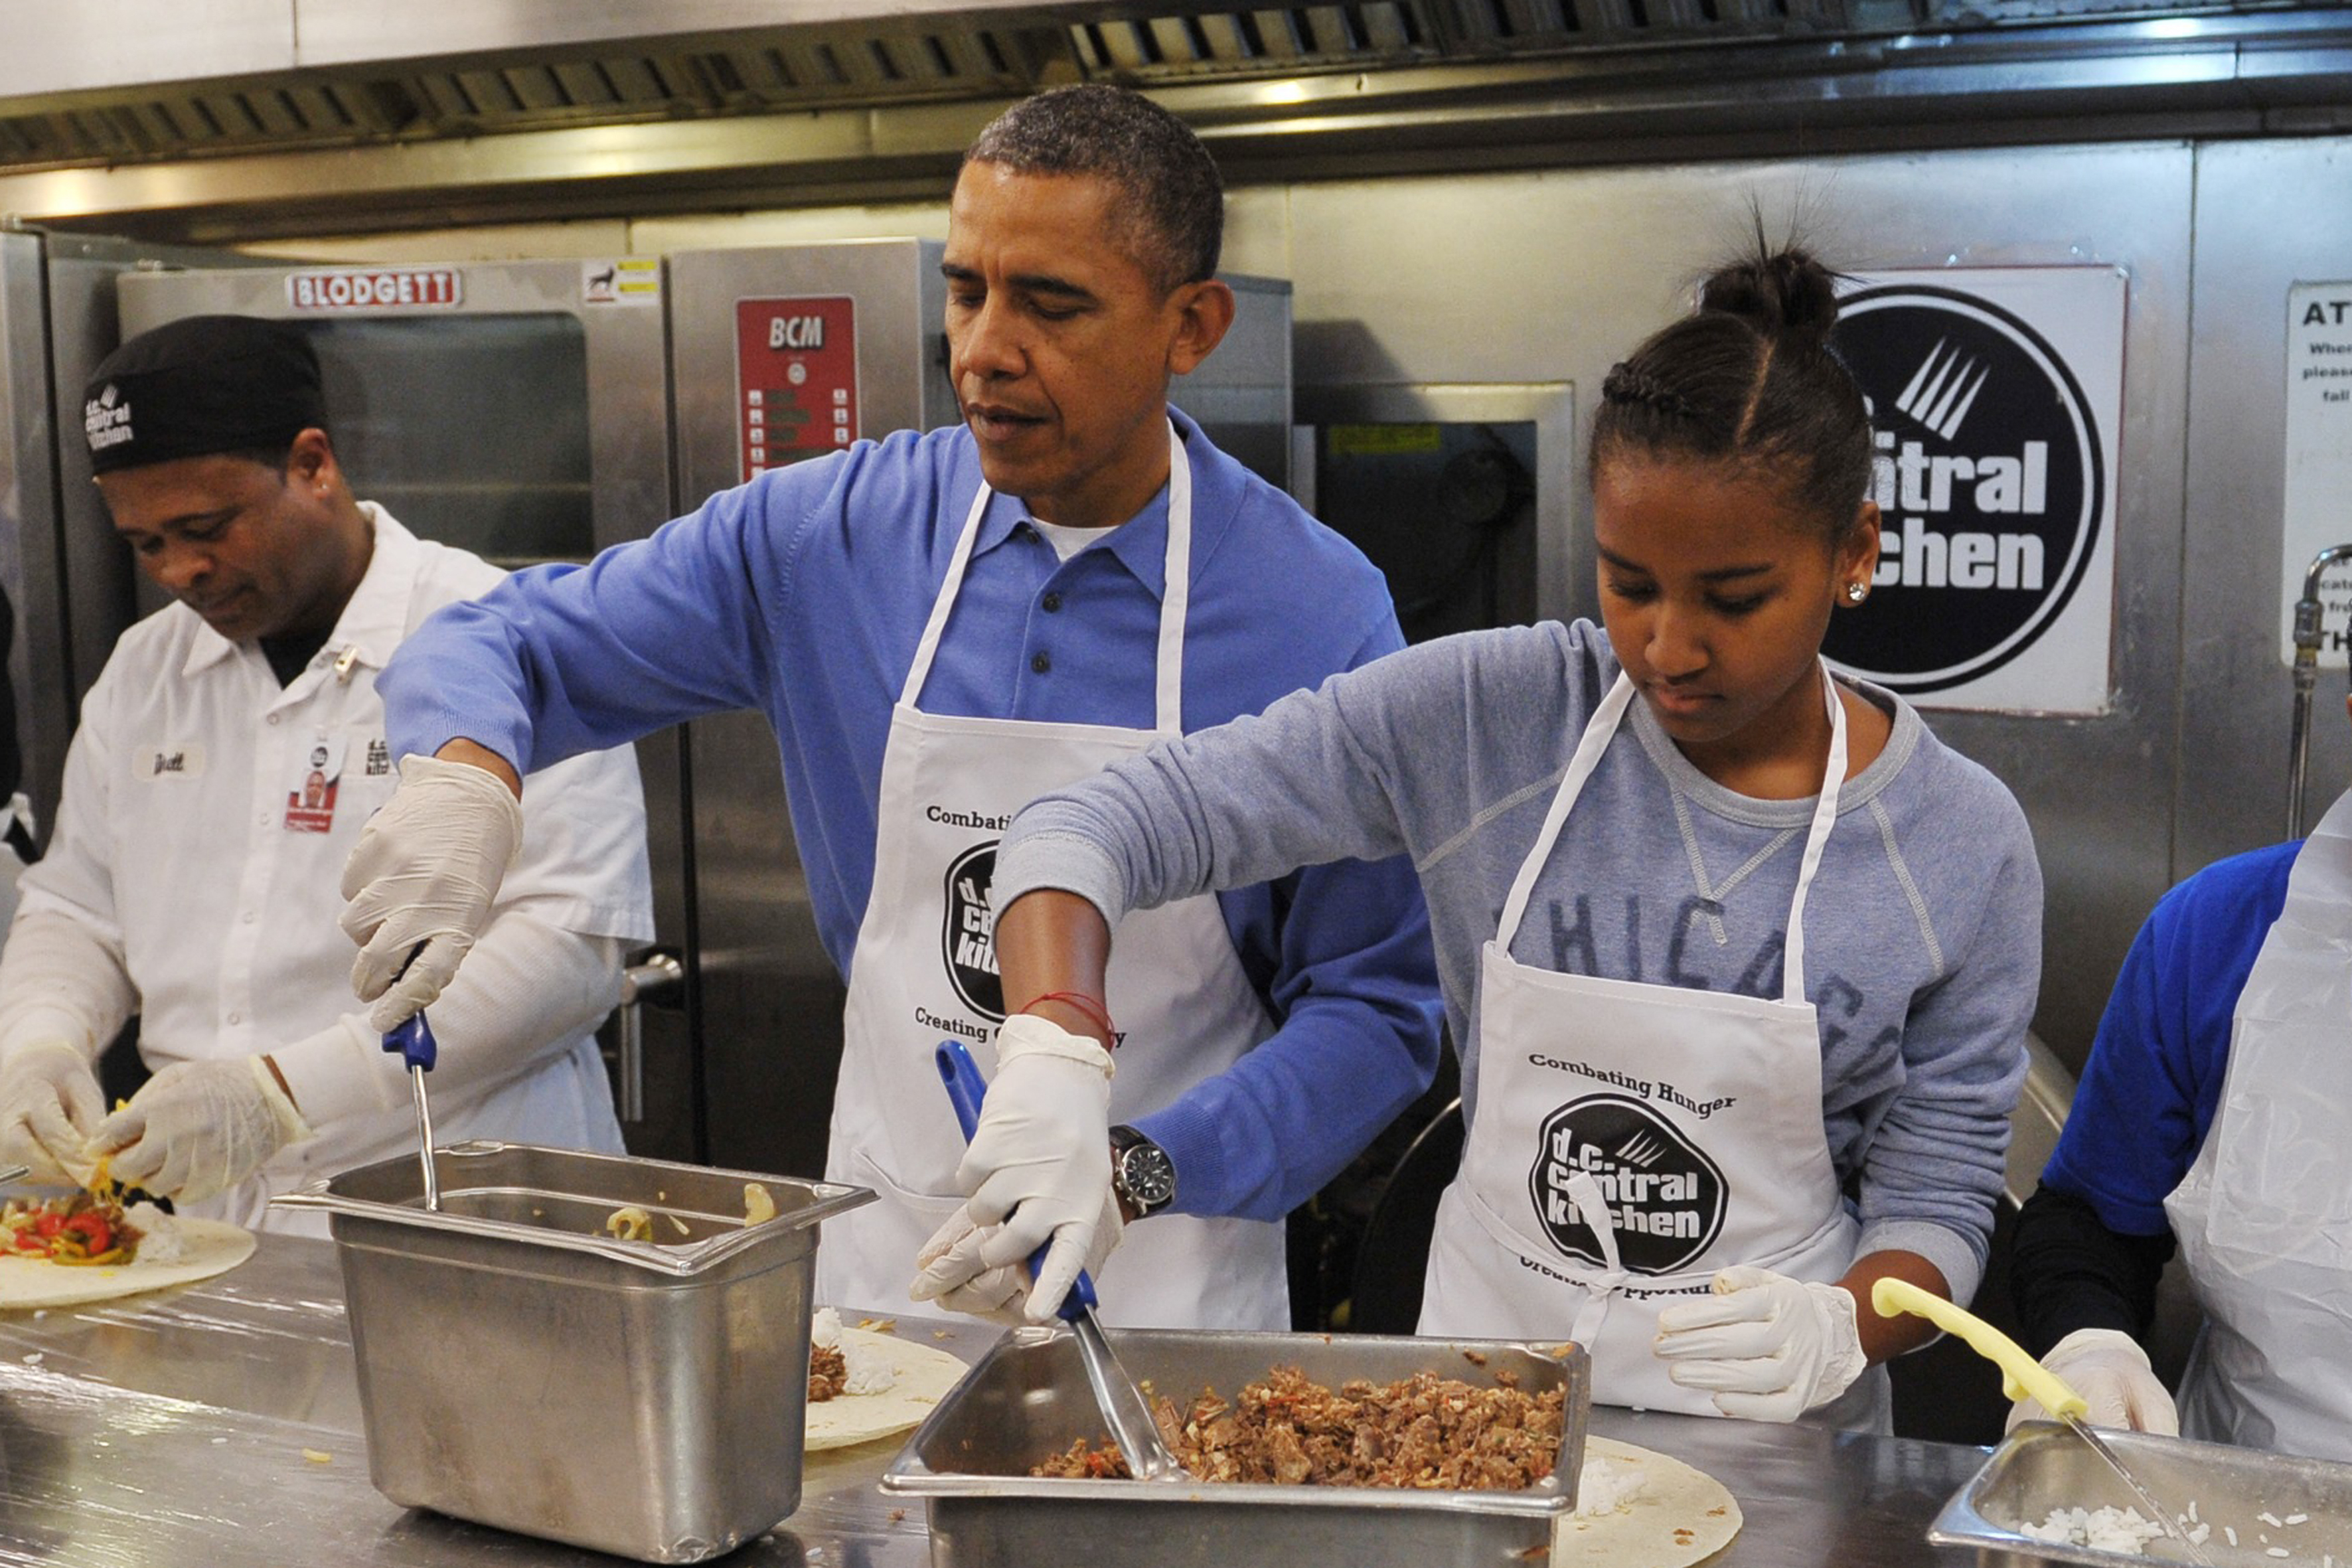 Barack and Sasha Obama taking part in a community service project, making burritos in celebration of the Martin Luther King Jr. Day in Washington, D.C. on January 20, 2014. | Source: Getty Images